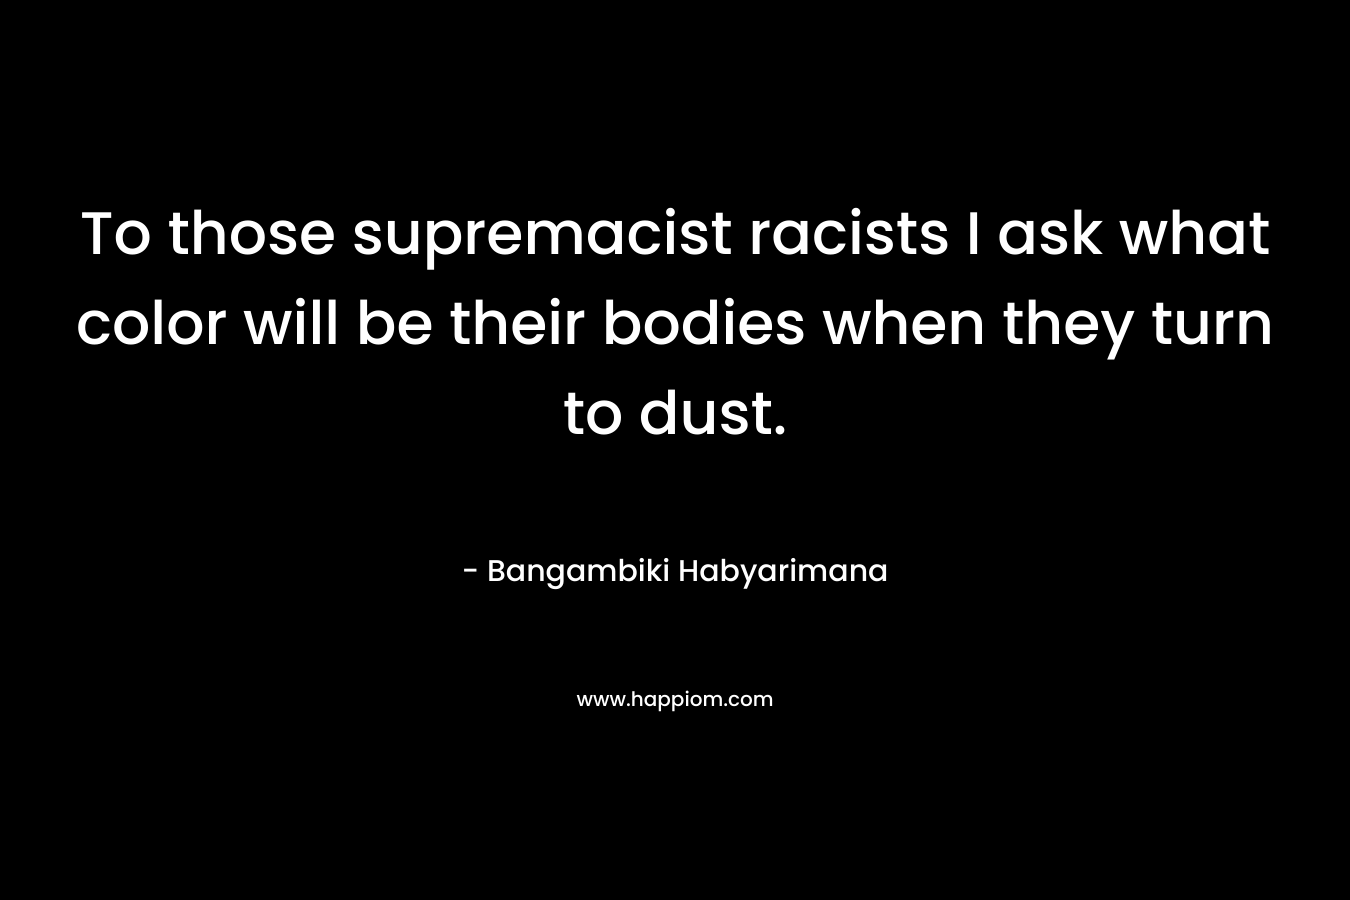 To those supremacist racists I ask what color will be their bodies when they turn to dust.